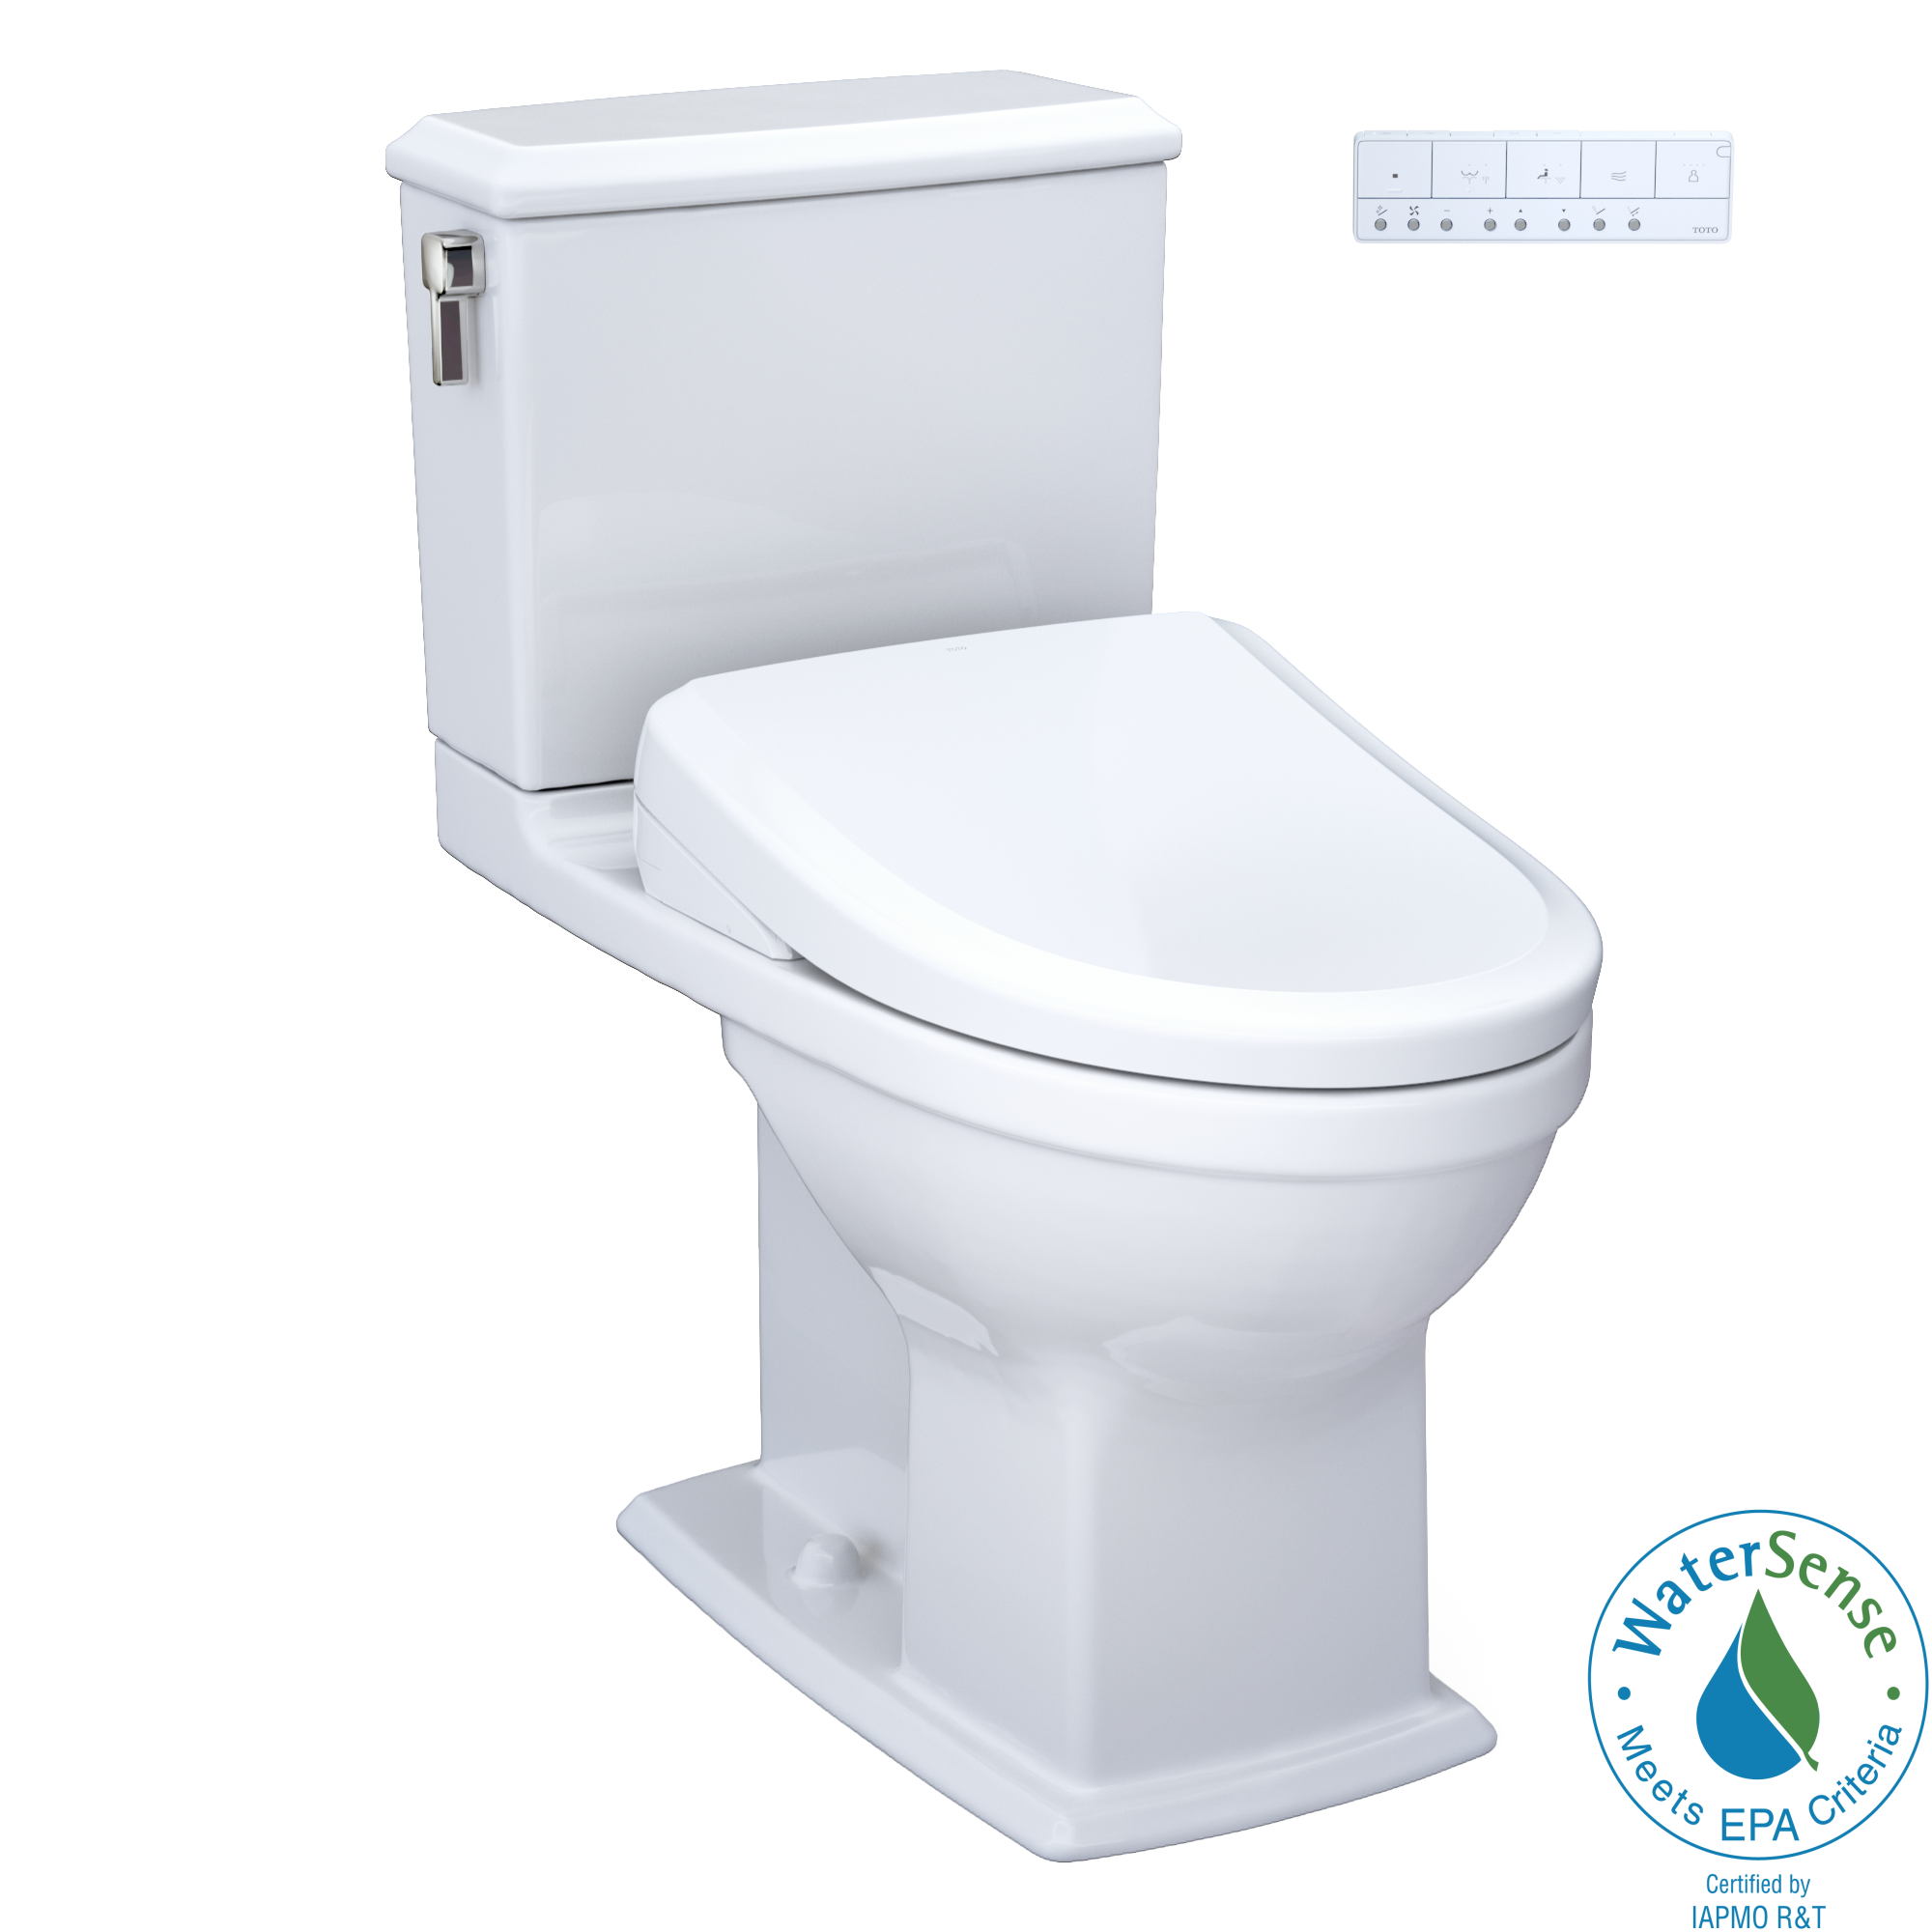 TOTO WASHLET+ Connelly Two-Piece Elongated Dual Flush 1.28 and 0.9 GPF Toilet and Classic WASHLET S7 Classic Bidet Seat, Cotton White - MW4944724CEMFG#01, MW4944724CEMFGA#01